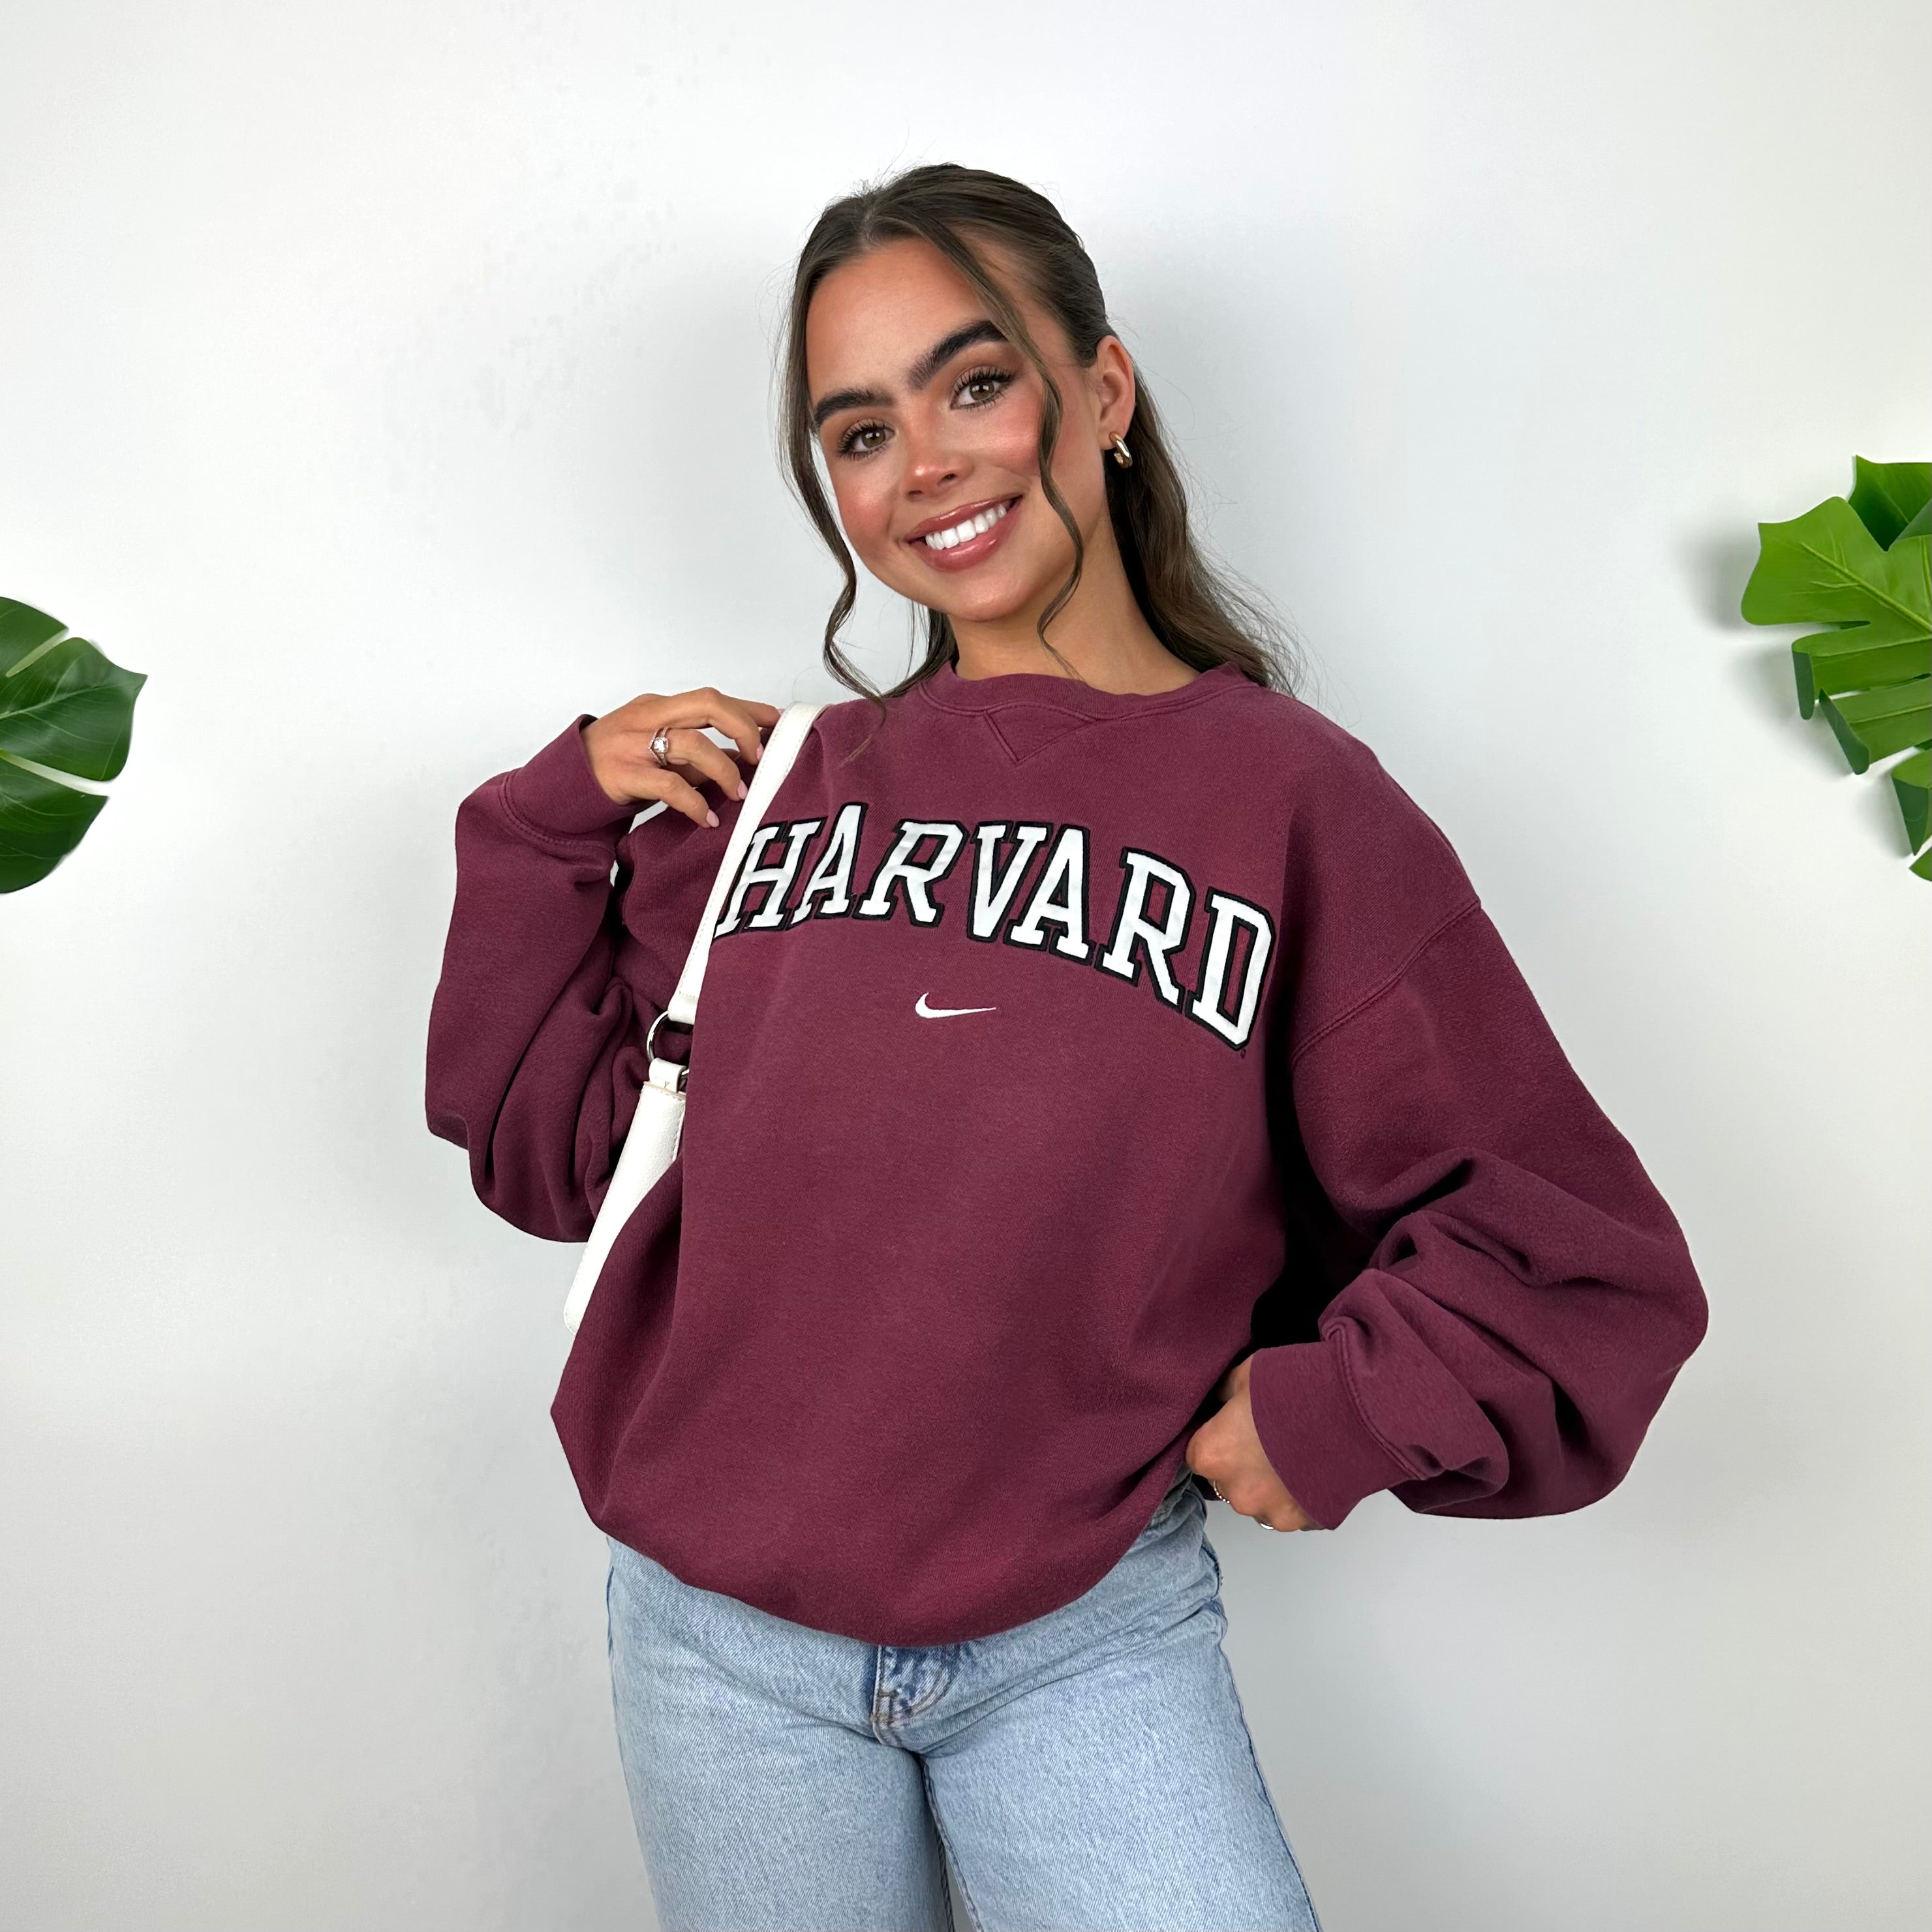 Nike x Harvard Maroon Embroidered Spell Out Sweatshirt (S)